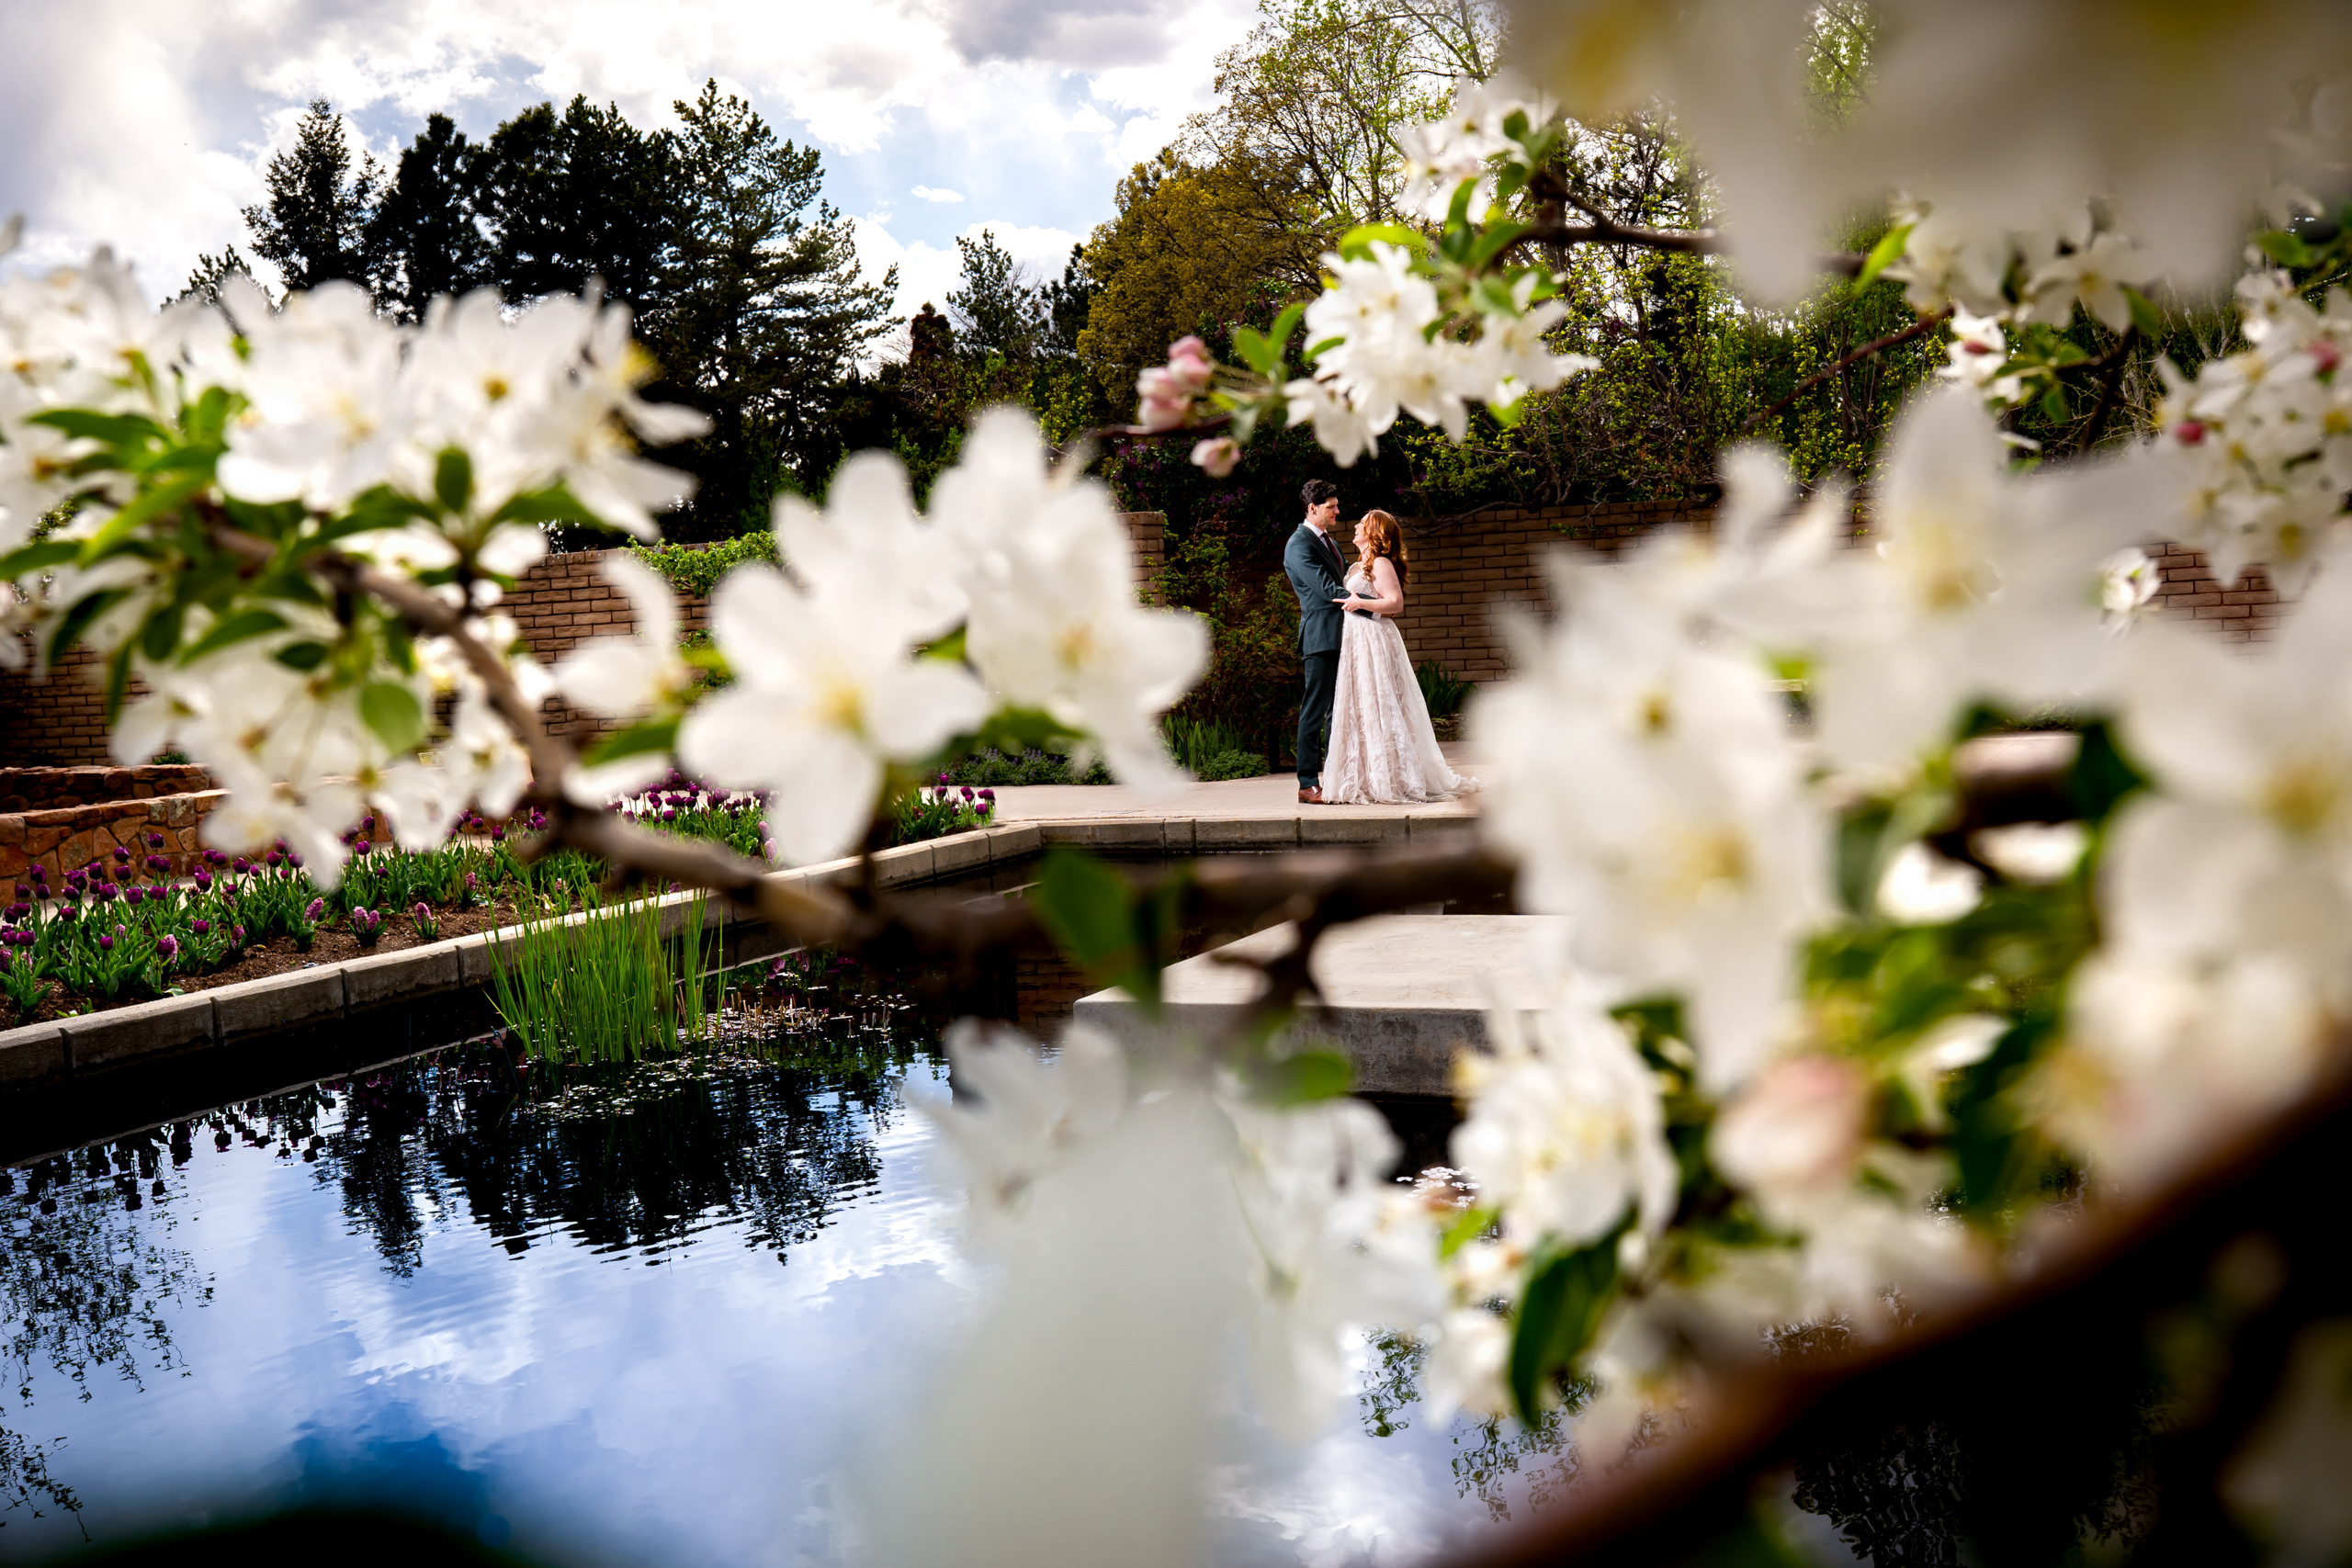 Bride and groom pose for portraits by a reflection pond surrounded by flowering trees and blossoming tulips, wedding photos, wedding photography, wedding photographer, wedding photo inspiration, Denver Botanic Garden wedding, Denver Botanic Garden wedding photos, Denver Botanic Garden wedding photography, Denver Botanic Garden wedding inspiration, Denver wedding venue, Denver wedding photos, Denver wedding photography, Denver wedding photographer, Colorado wedding photography